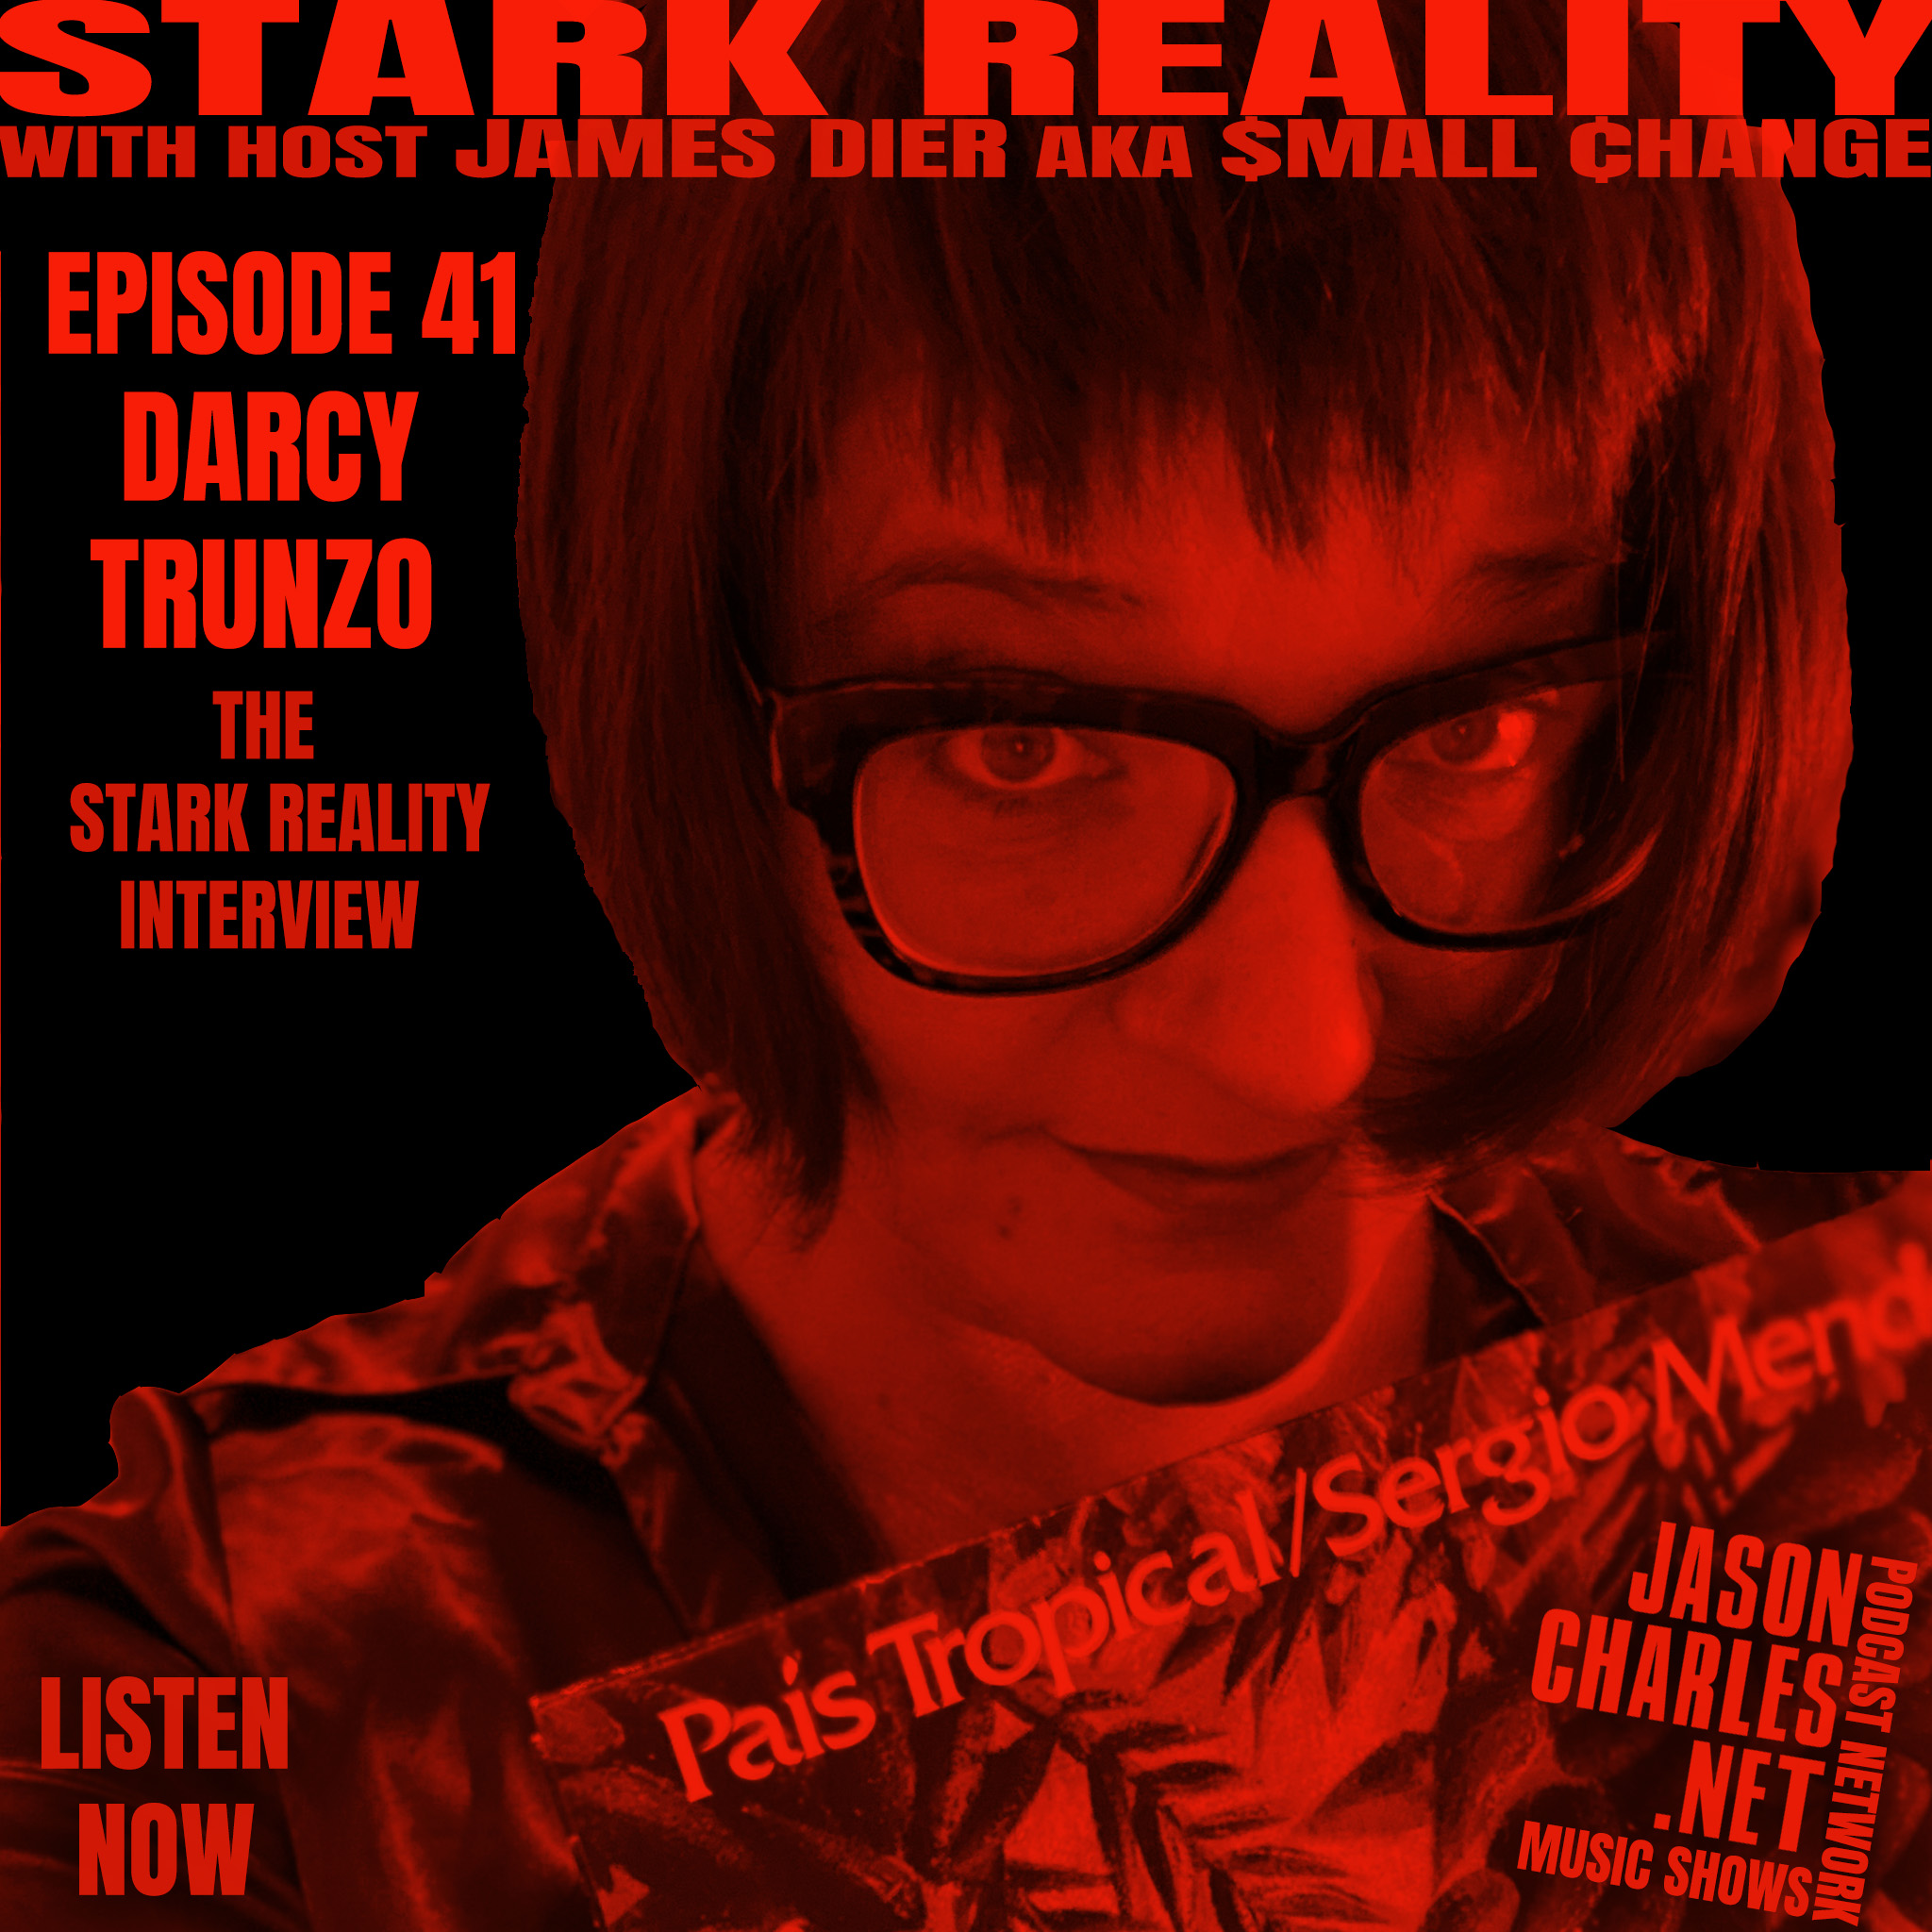 STARK REALITY Episode 41 Guest DARCY TRUNZO